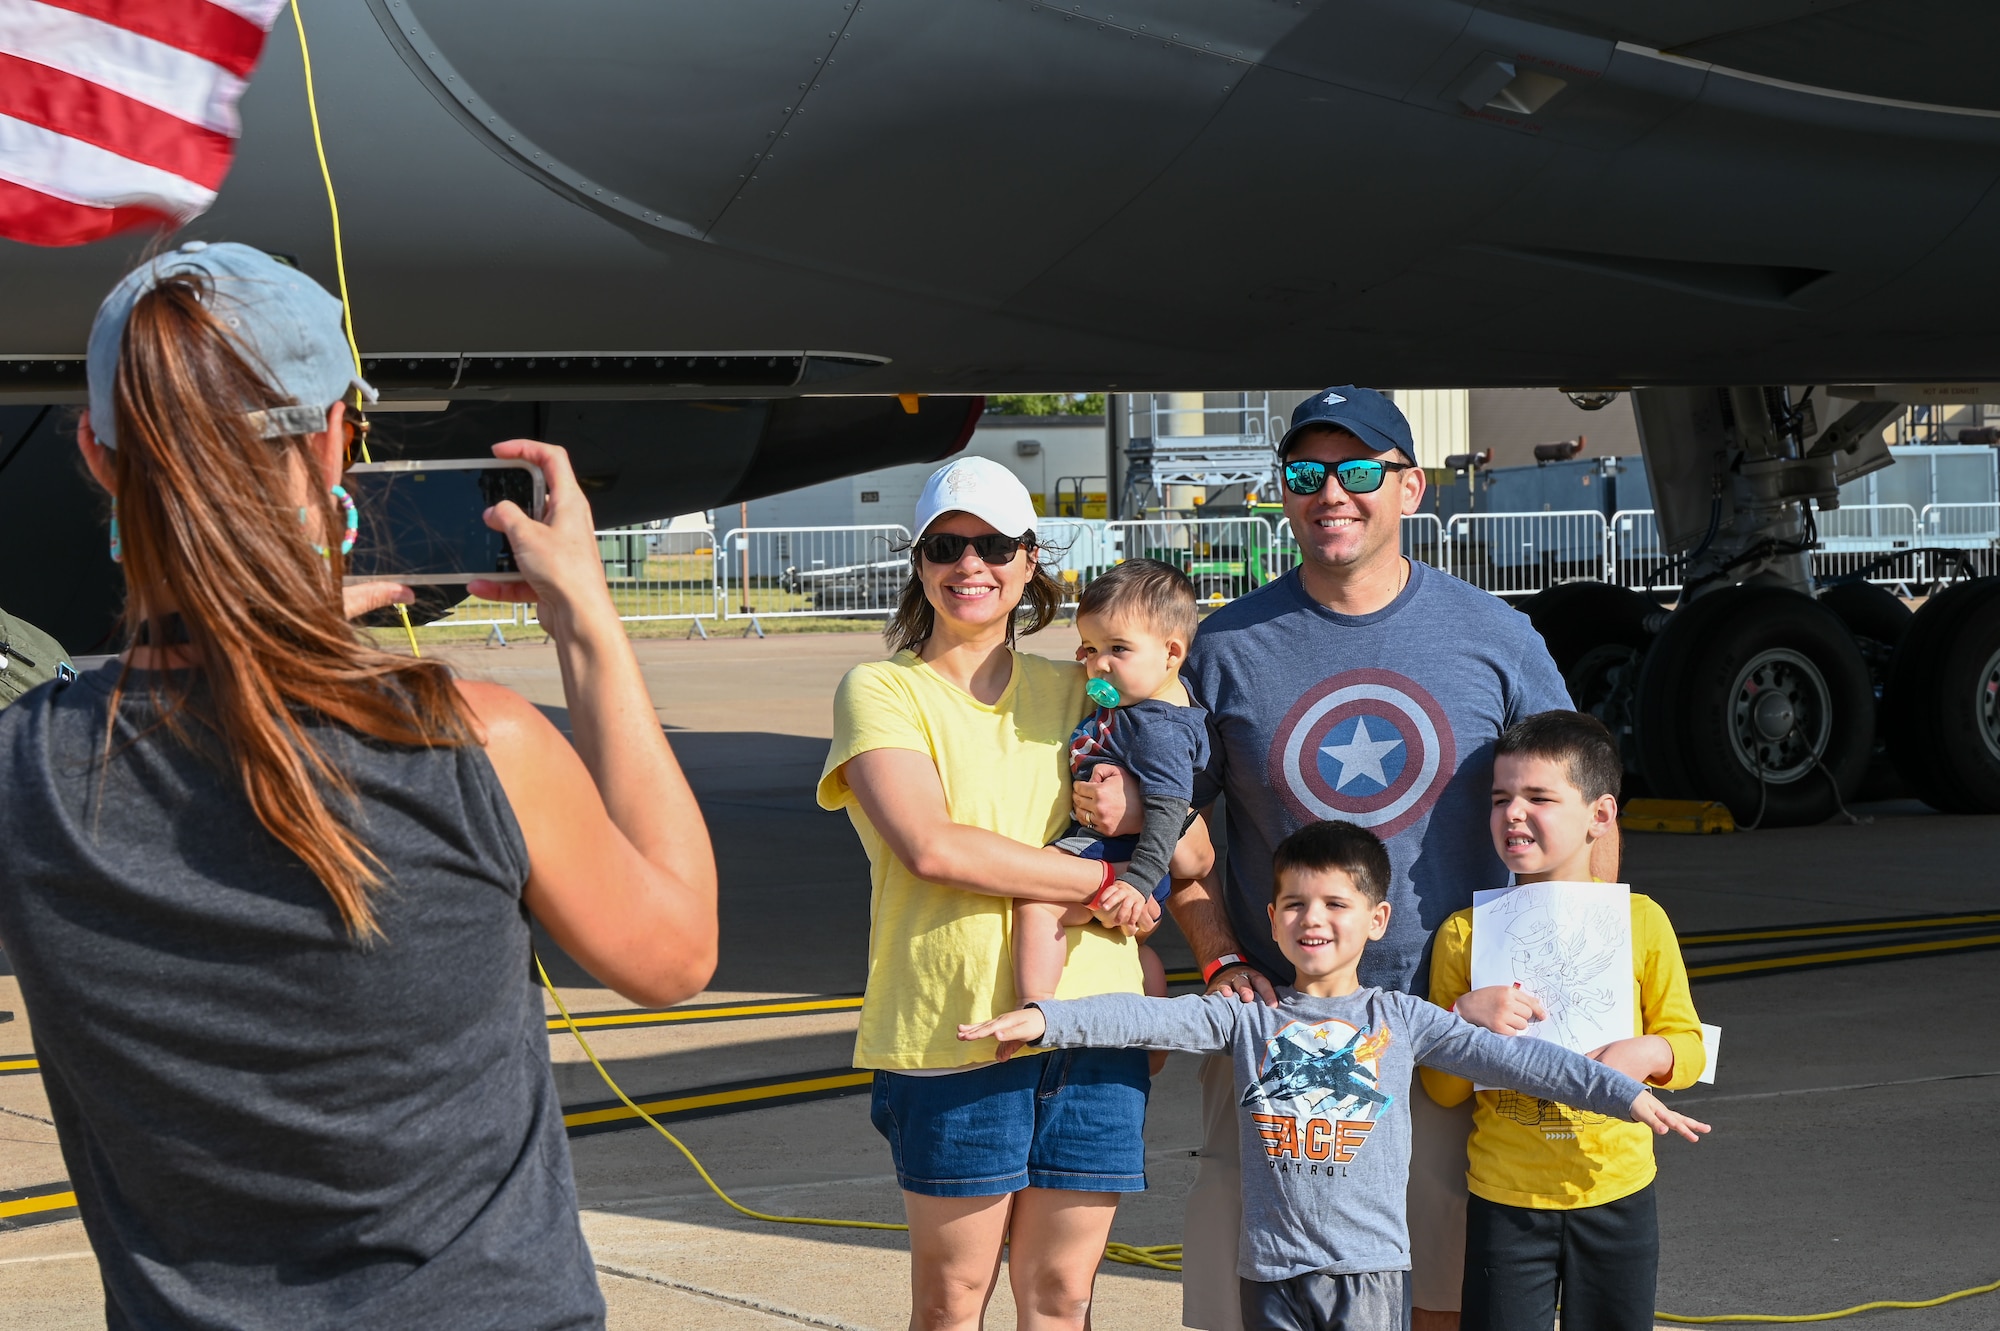 Attendees of the Red River Thunder Open House and Airshow take a photo in front of the KC-46 Pegasus at Altus Air Force Base, Oklahoma, Oct. 1, 2022. More than 20,000 people attended the airshow, including civilians, Department of Defense employees, service members and retirees. (U.S. Air Force photo by Senior Airman Kayla Christenson)